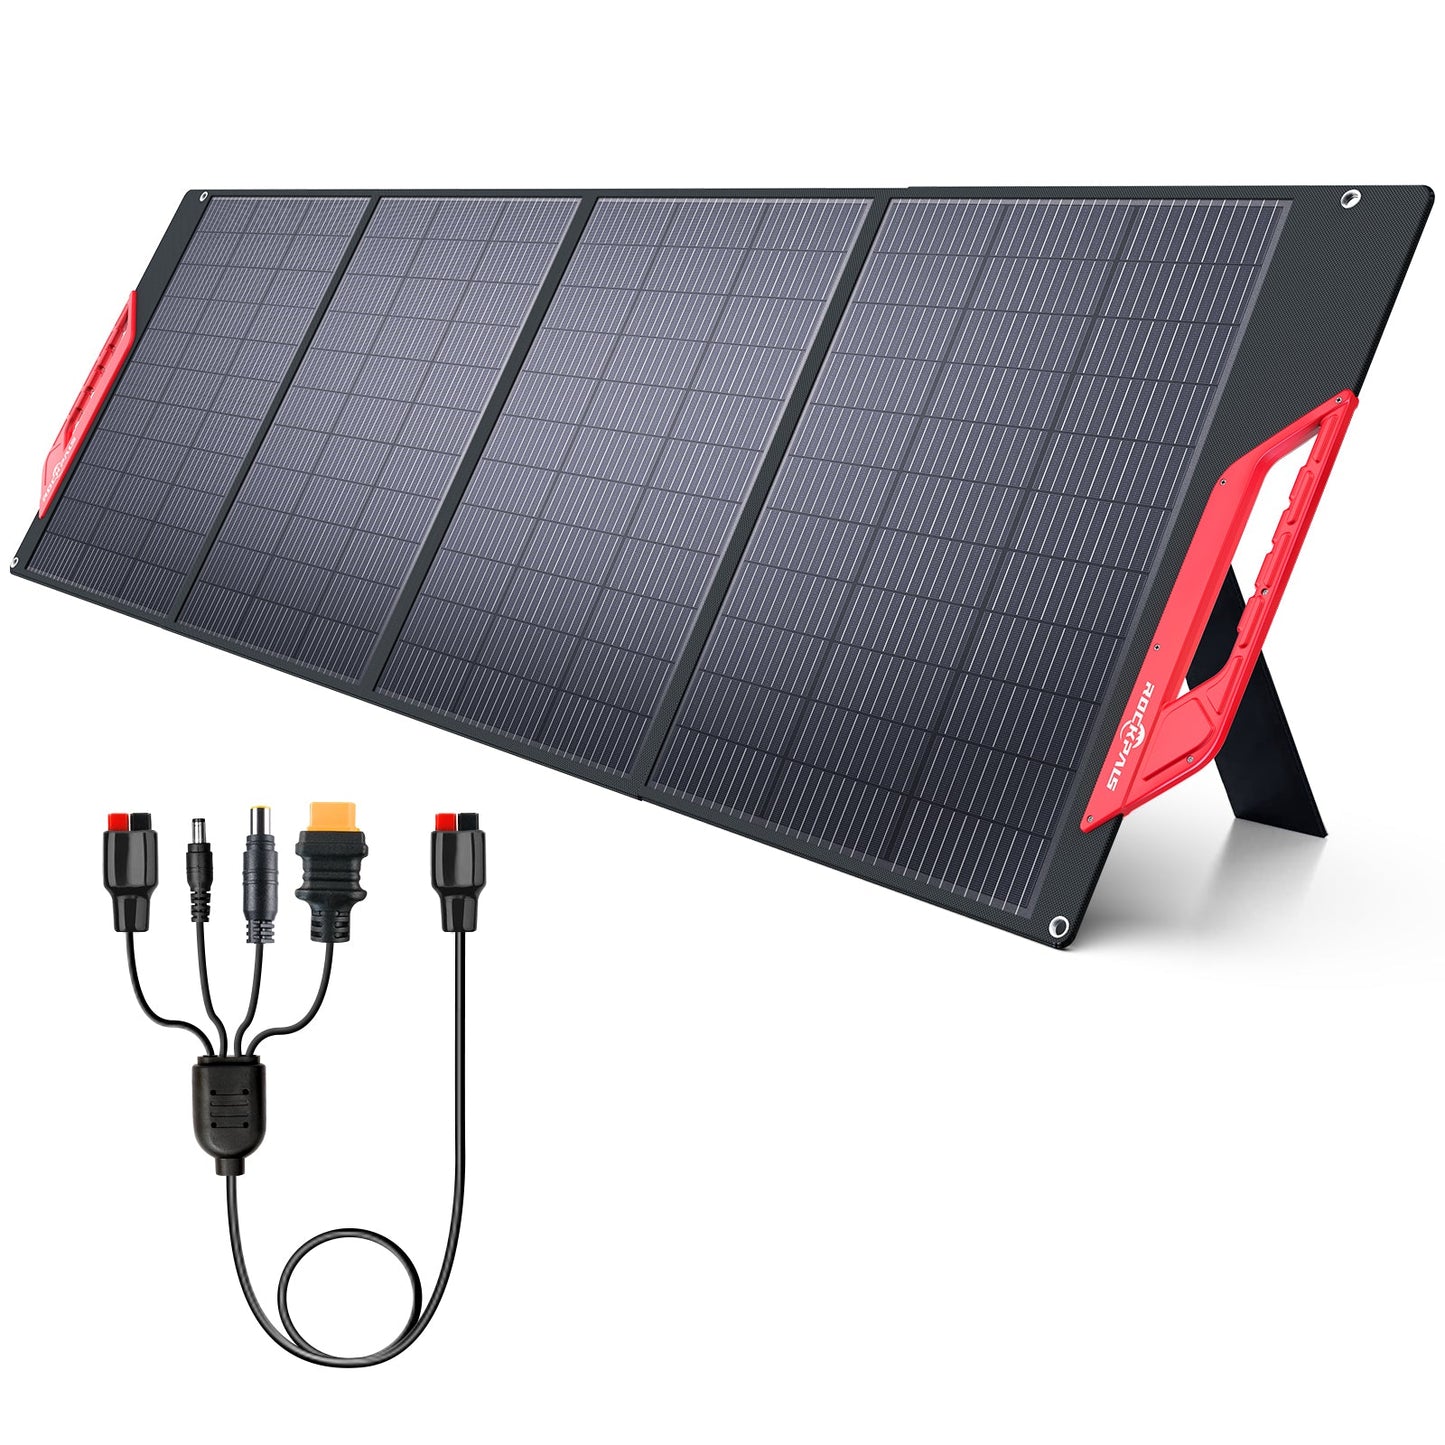 Rockpals RP085 - 200W Portable and Foldable Solar Panel with Kickstand - For Off-Grid